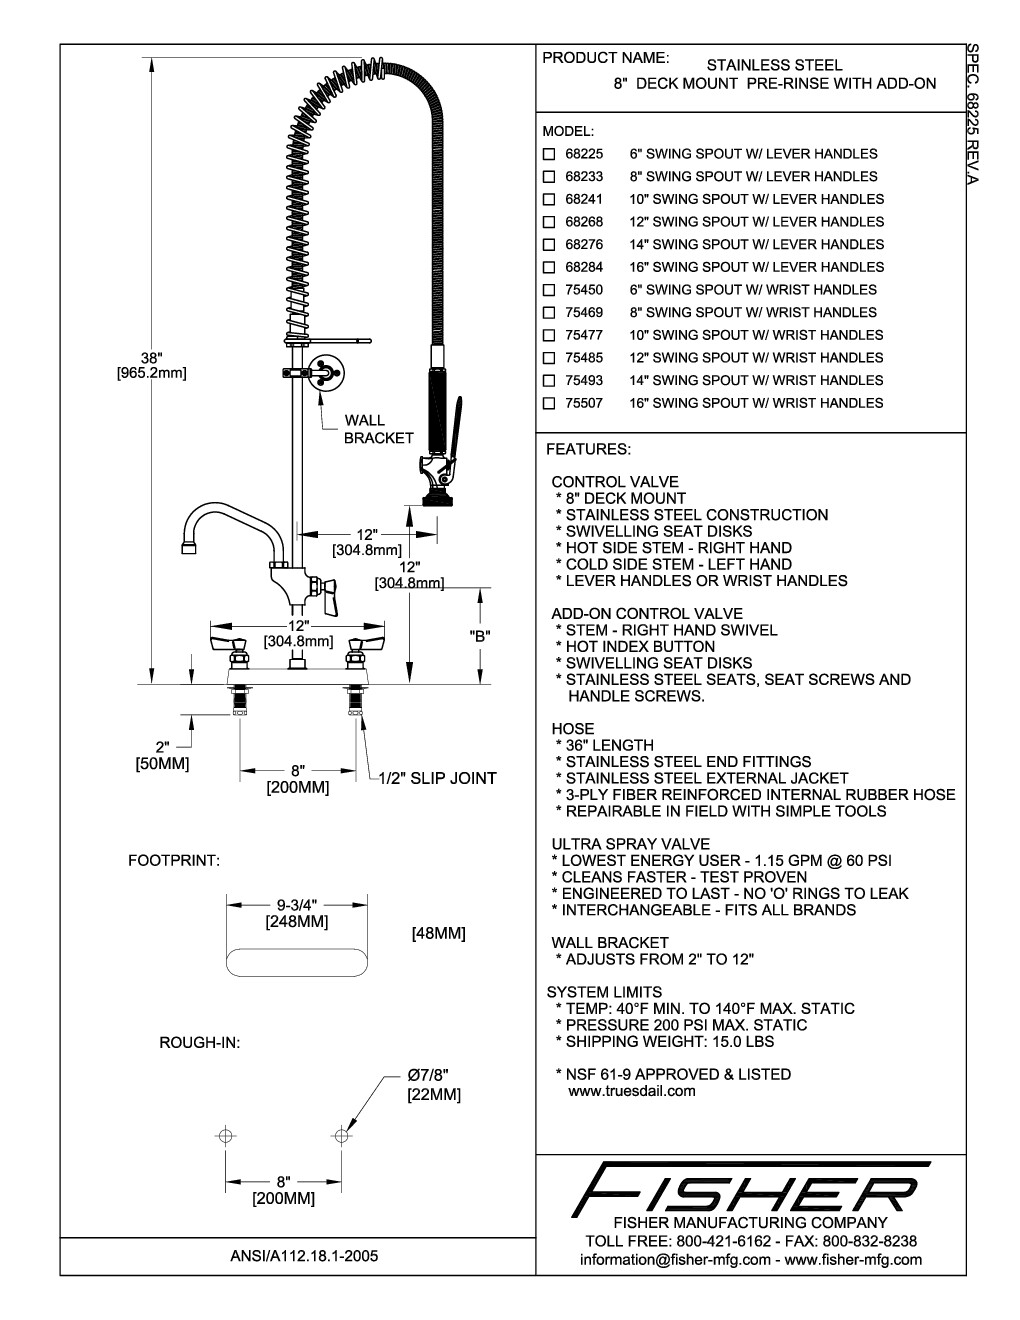 Fisher 68268 with Add On Faucet Pre-Rinse Faucet Assembly